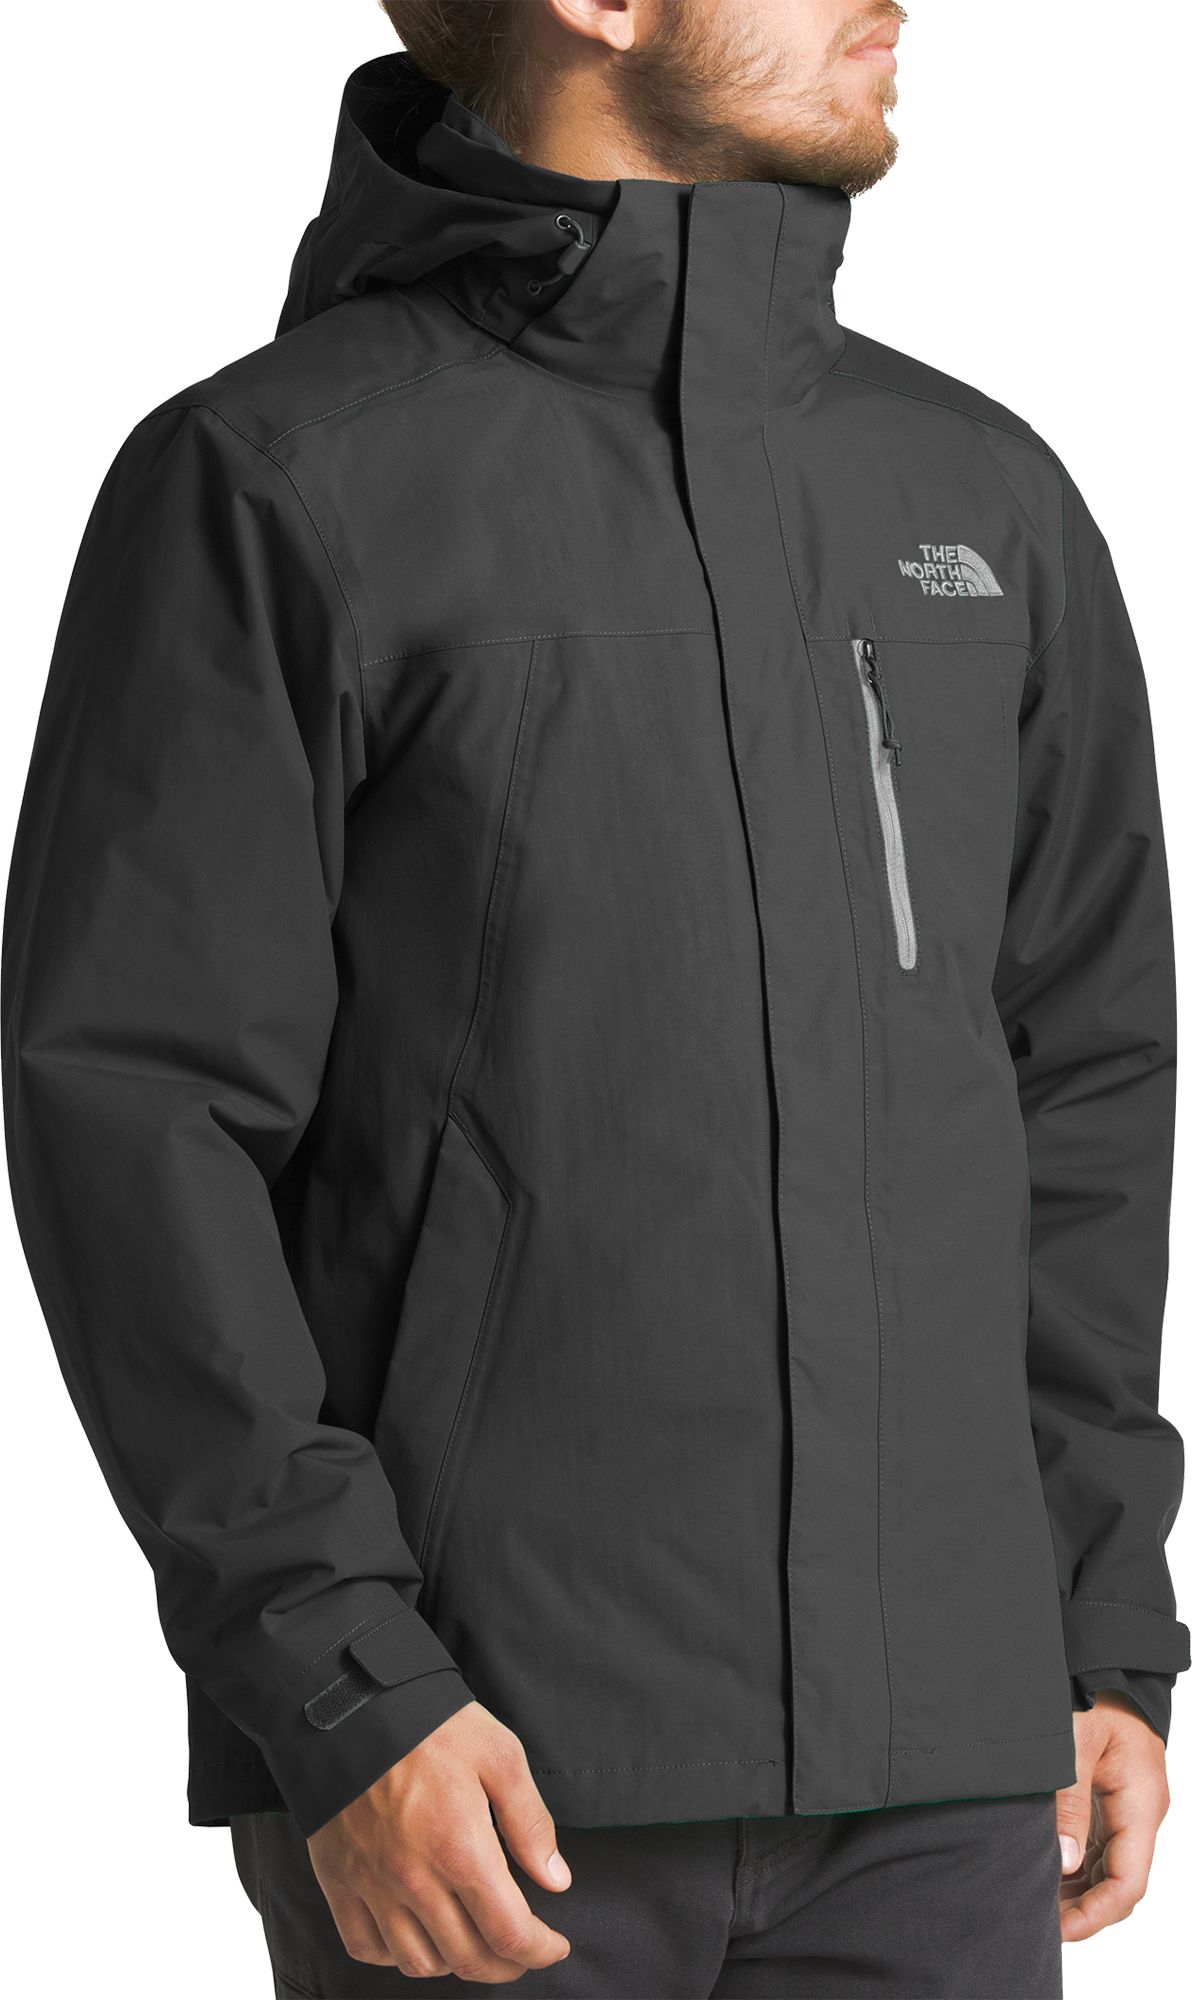 The North Face Men's Carto Triclimate Jacket - 9.97